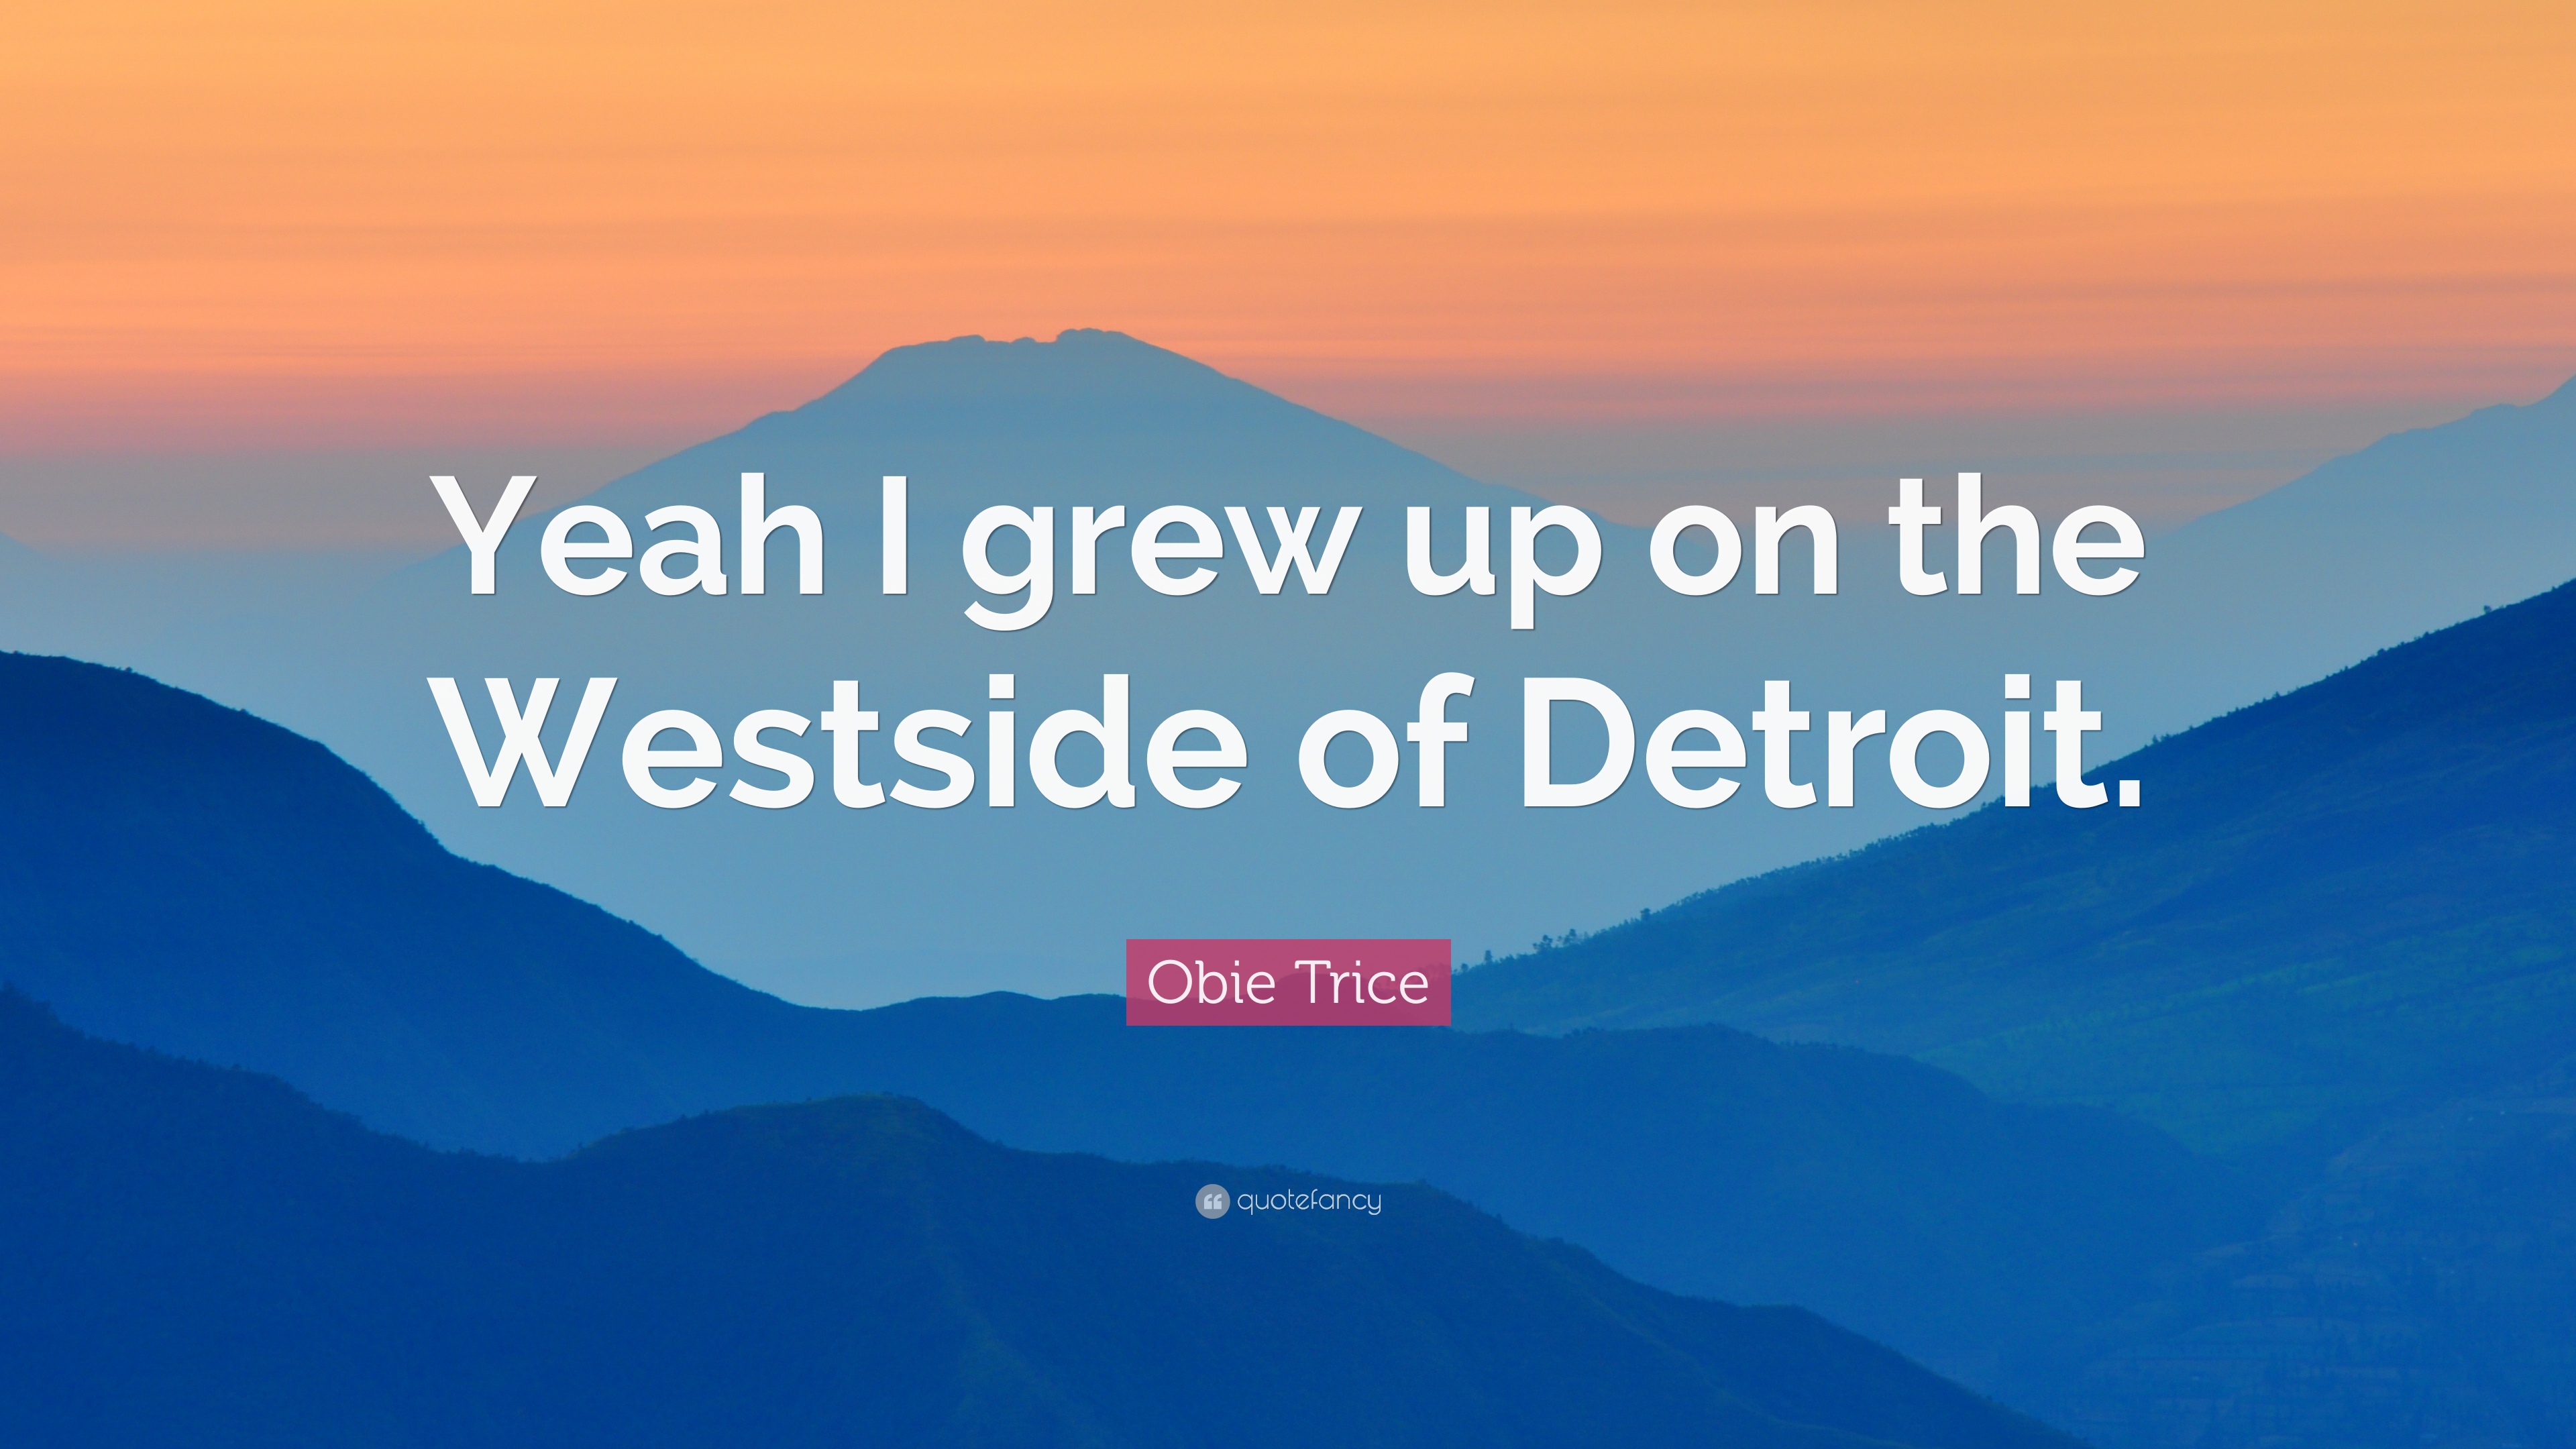 Obie Trice Quote: “Yeah I grew up on the Westside of Detroit.” 7